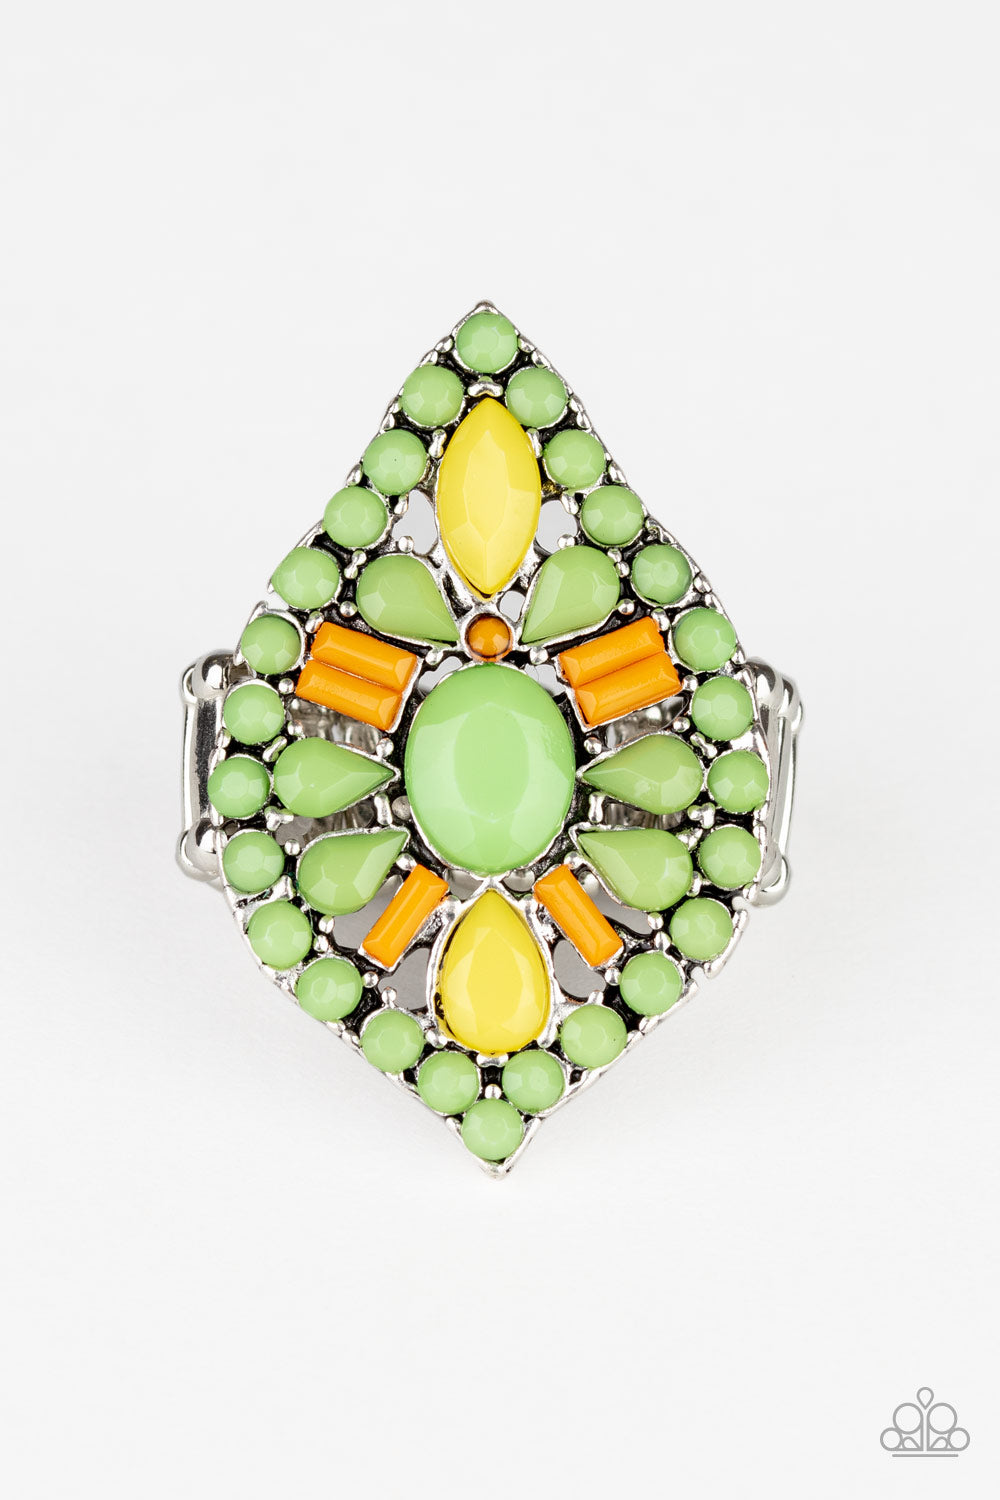  Paparazzi Accessories Jungle Jewelry - Green Rings featuring oval, round, teardrop, and marquise shapes, a vivacious collection of orange, yellow, and green beads are encrusted along the top of a silver frame, creating a colorful tribal centerpiece. Features a stretchy band for a flexible fit.  Sold as one individual ring.